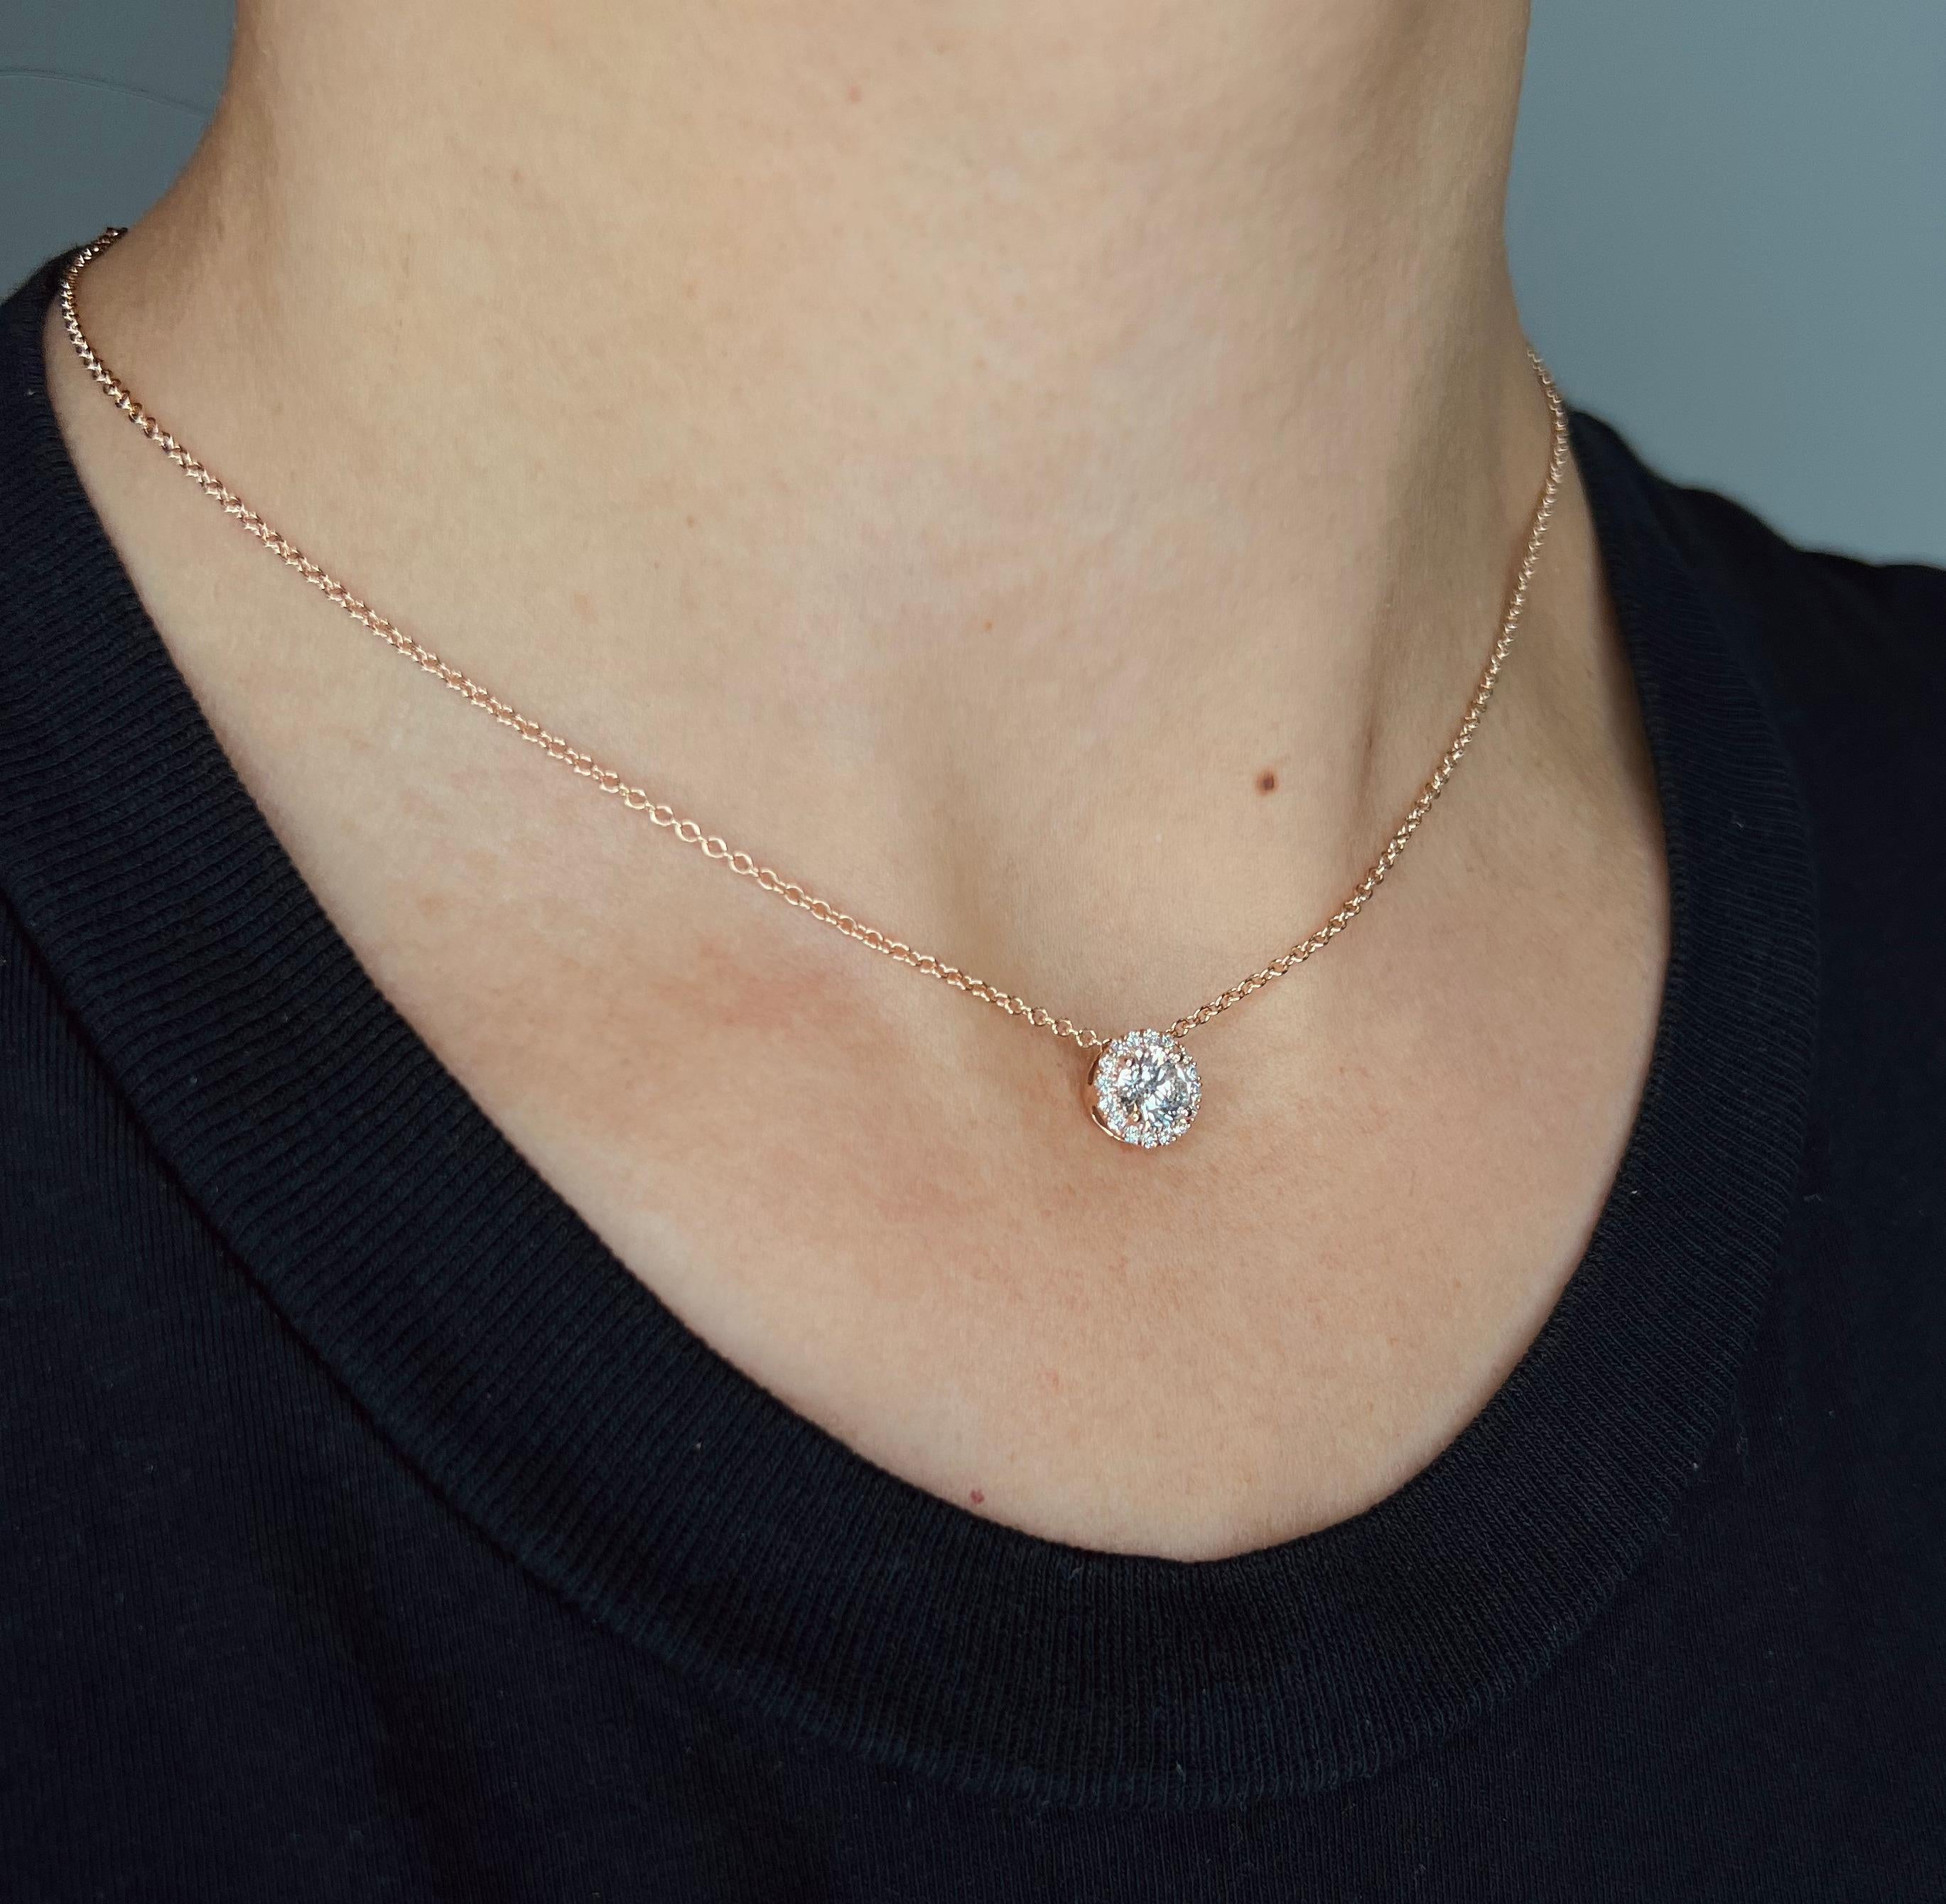 This diamond circle pendant provides a glowing chic look.
Metal: 14k Gold
Diamond Total Carats (Includes 0.15ct halo): 0.90 Total (0.75 Center) 
Diamond Cut: Round Natural Diamonds (Not Lab Grown)
Diamond Clarity: VS
Diamond Color: F-G
Color: White